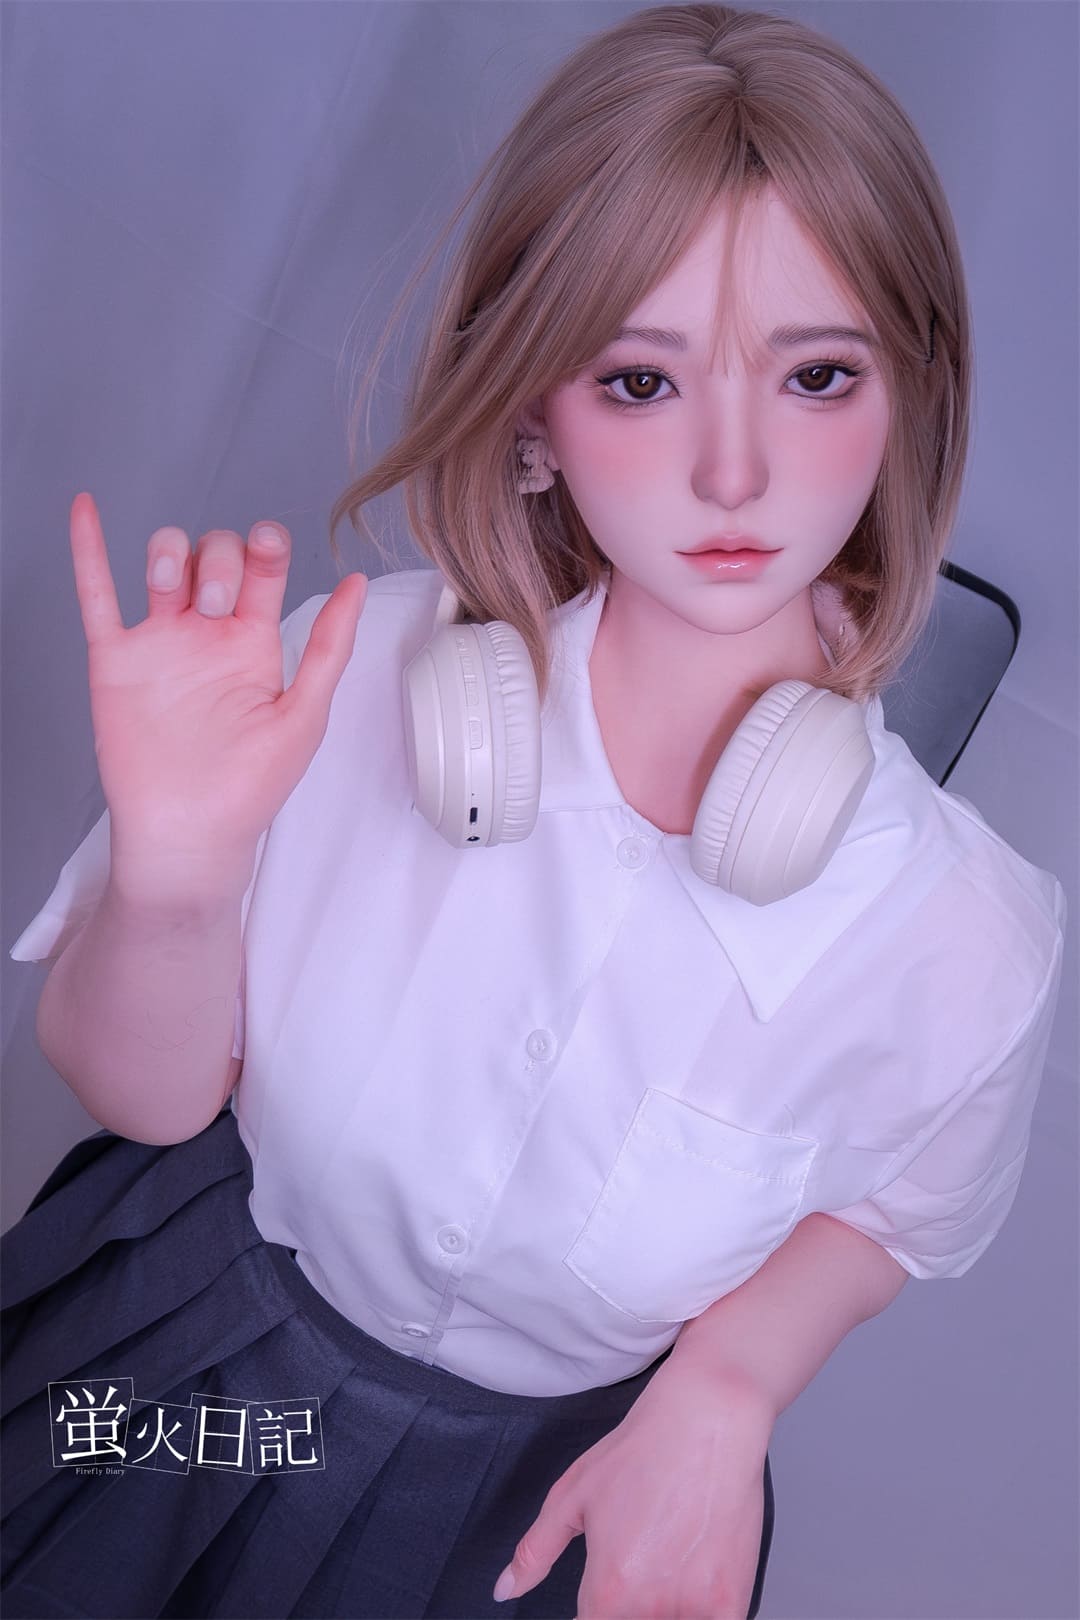 4ft11 / 151cm Cute Face Silicone Japanese Sex Doll - Firefly Diary Doll Zephyr